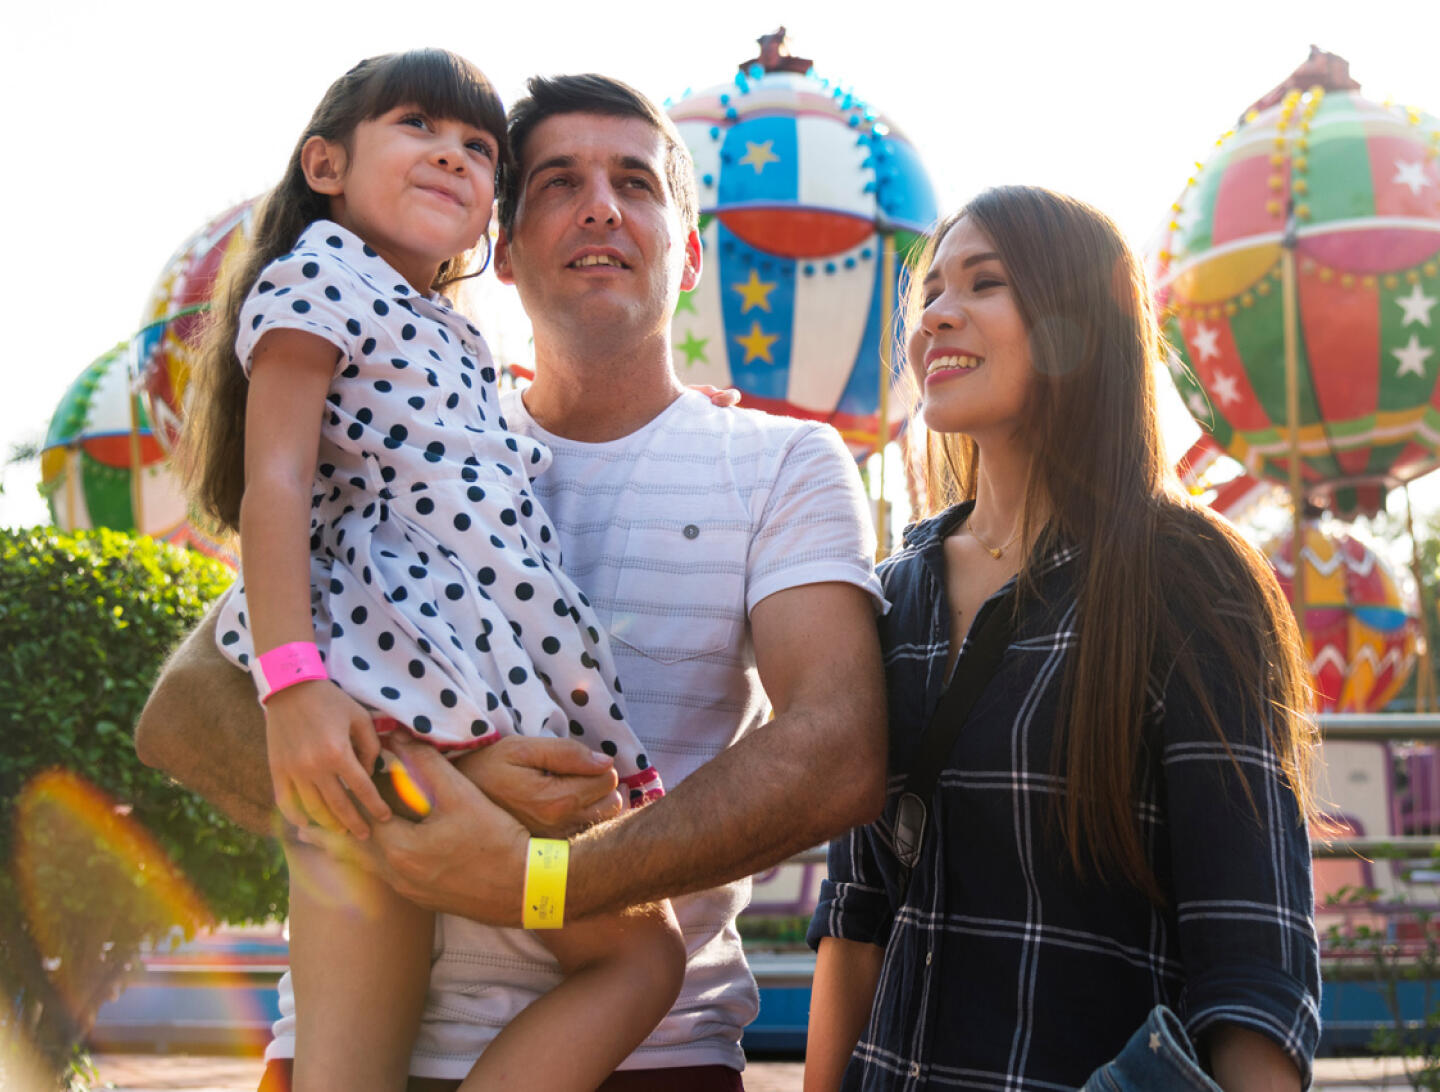 Happy family at the Parc du Petit Prince with colorful rides in the background